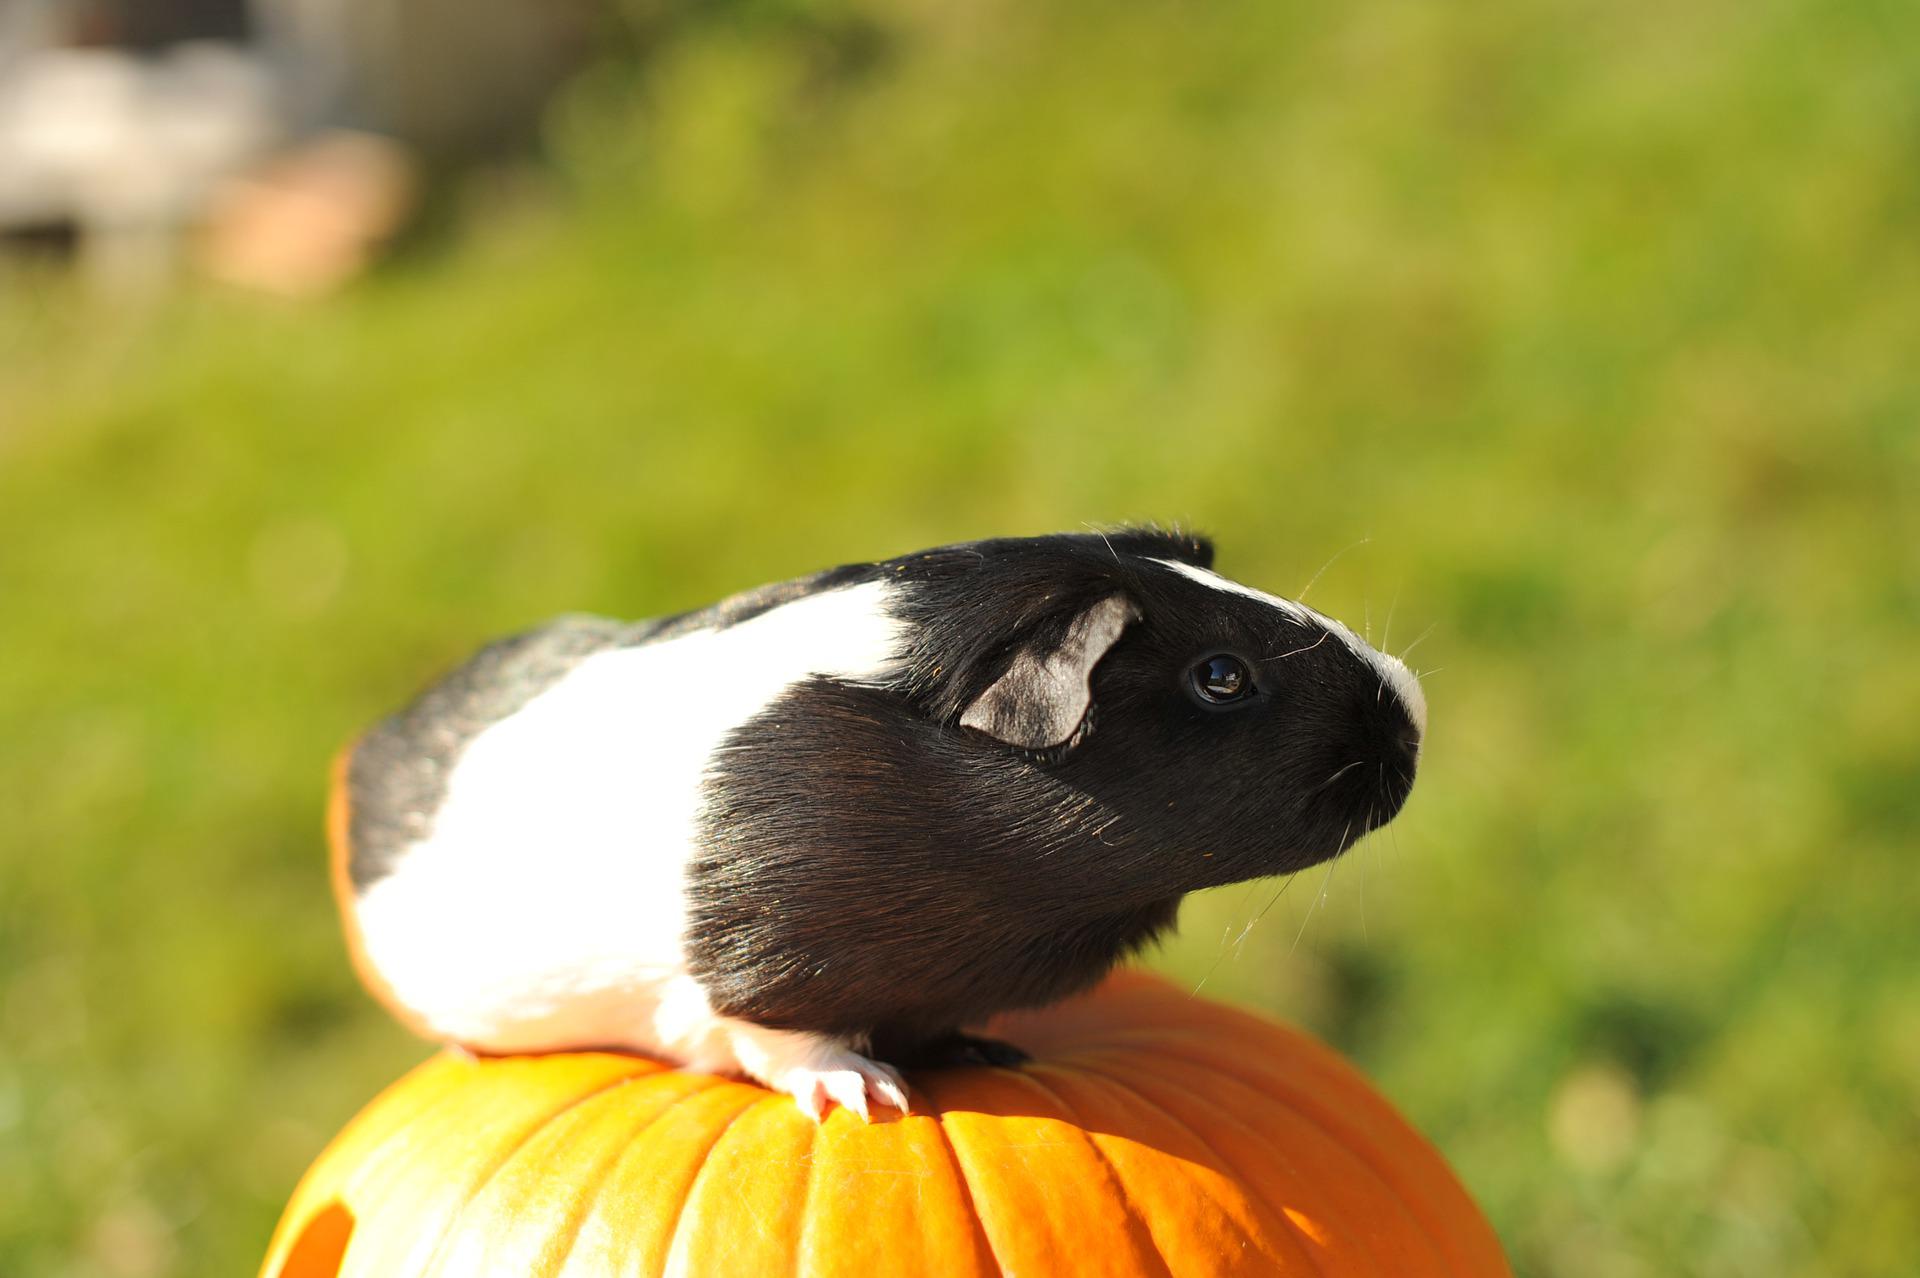 A guinea pig sitting on top of a pumpkin that they can eat